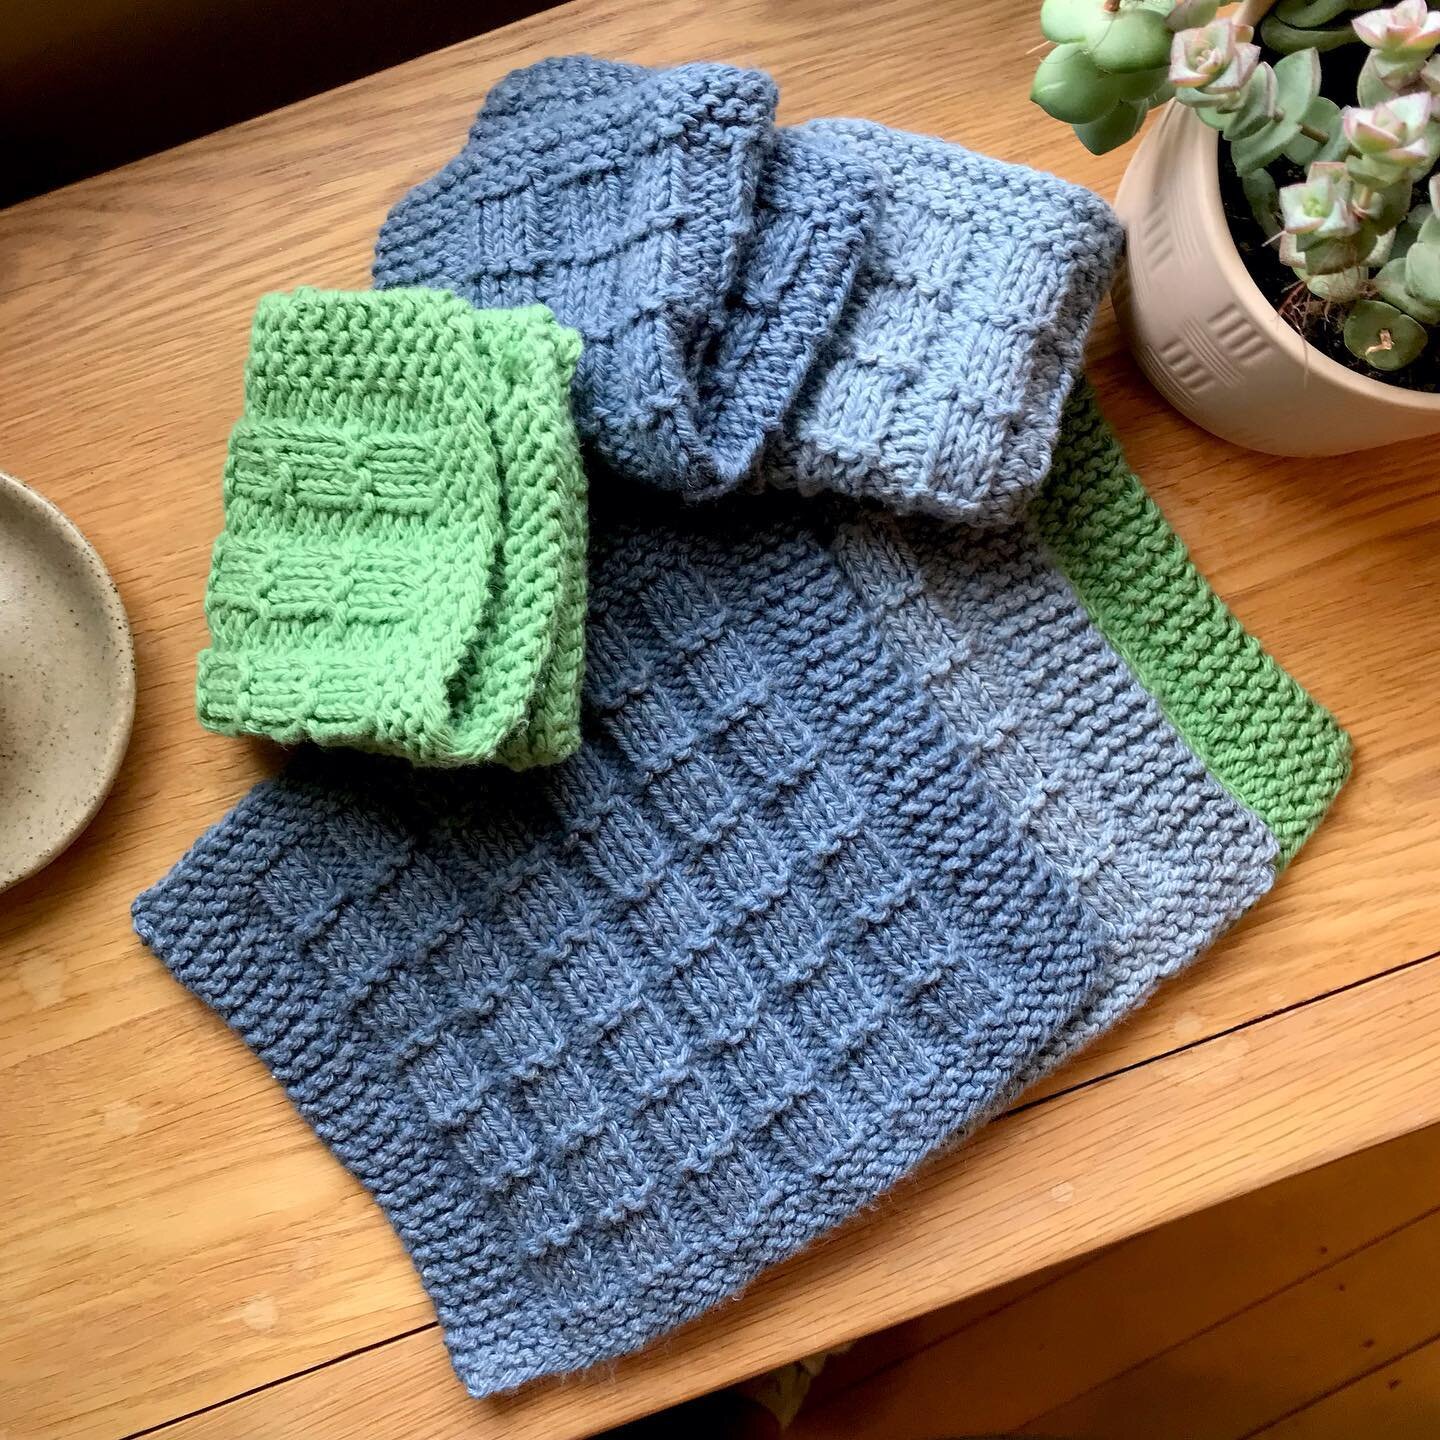 Final dishcloths for the year 🫧 Great for secret Santa gifts, teacher gifts &amp; stocking fillers. They last for years and are kinder to the earth than commercial cloths. I have two green, two light blue, and two darker blue. $10 each plus postage.